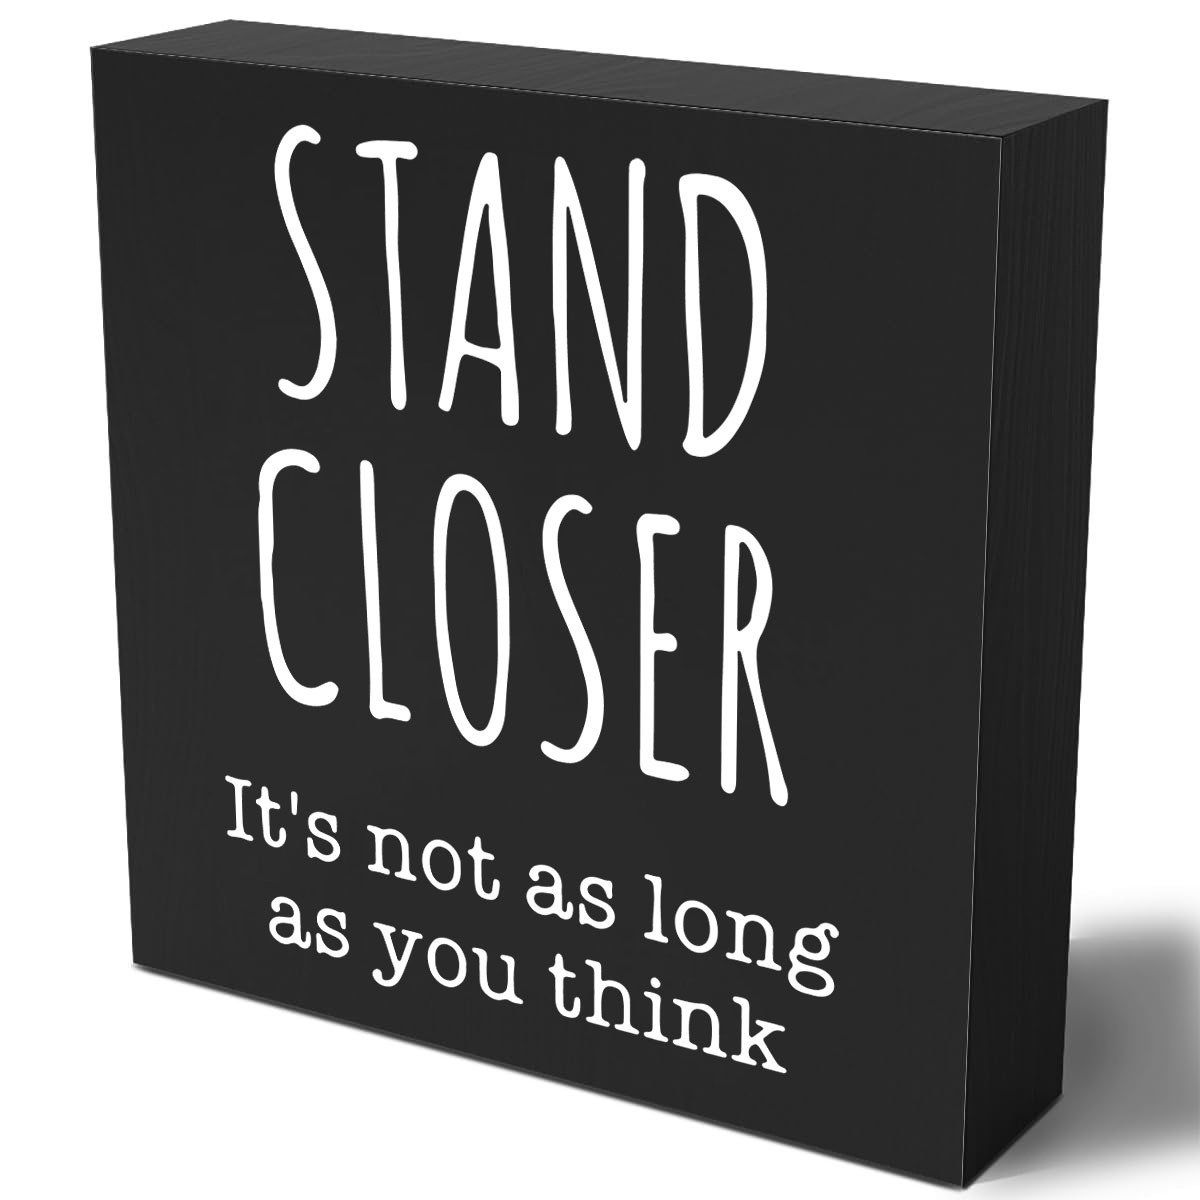 

1pc Stand Closer It's Not As Long As You Think Wooden Box Sign Decorative Funny Bathroom Wood Box Sign Home Decor Rustic Farmhouse Square Desk Decor Sign For Shelf